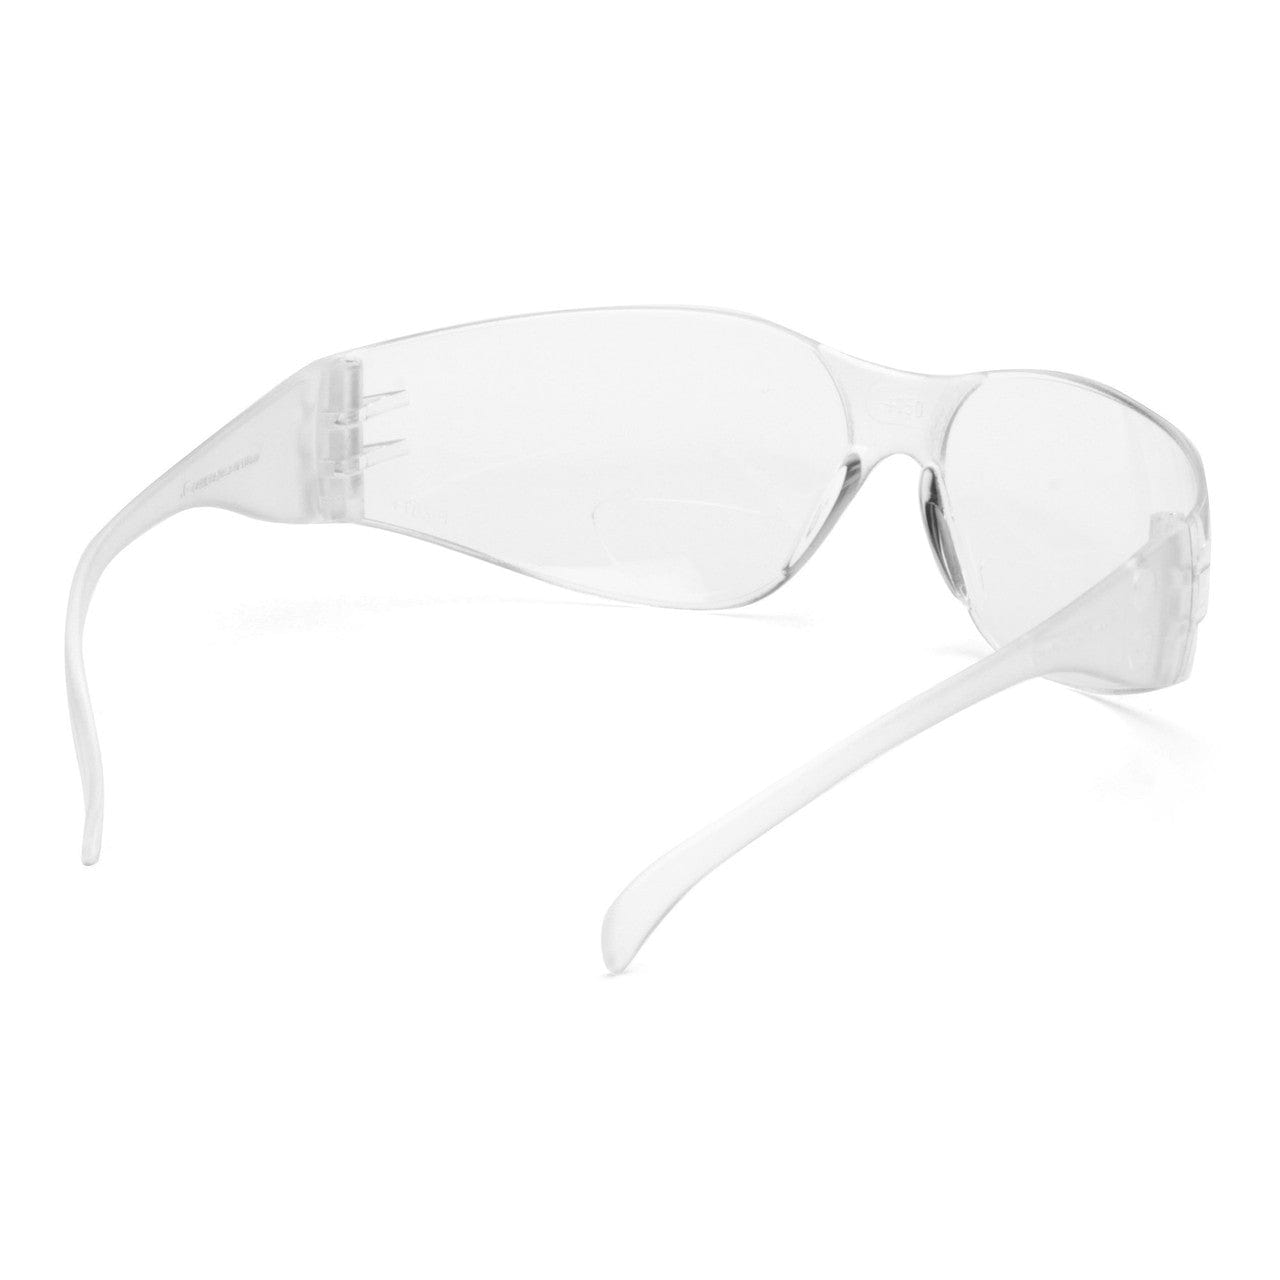 Pyramex S4110R Intruder Readers Safety Glasses Inside View